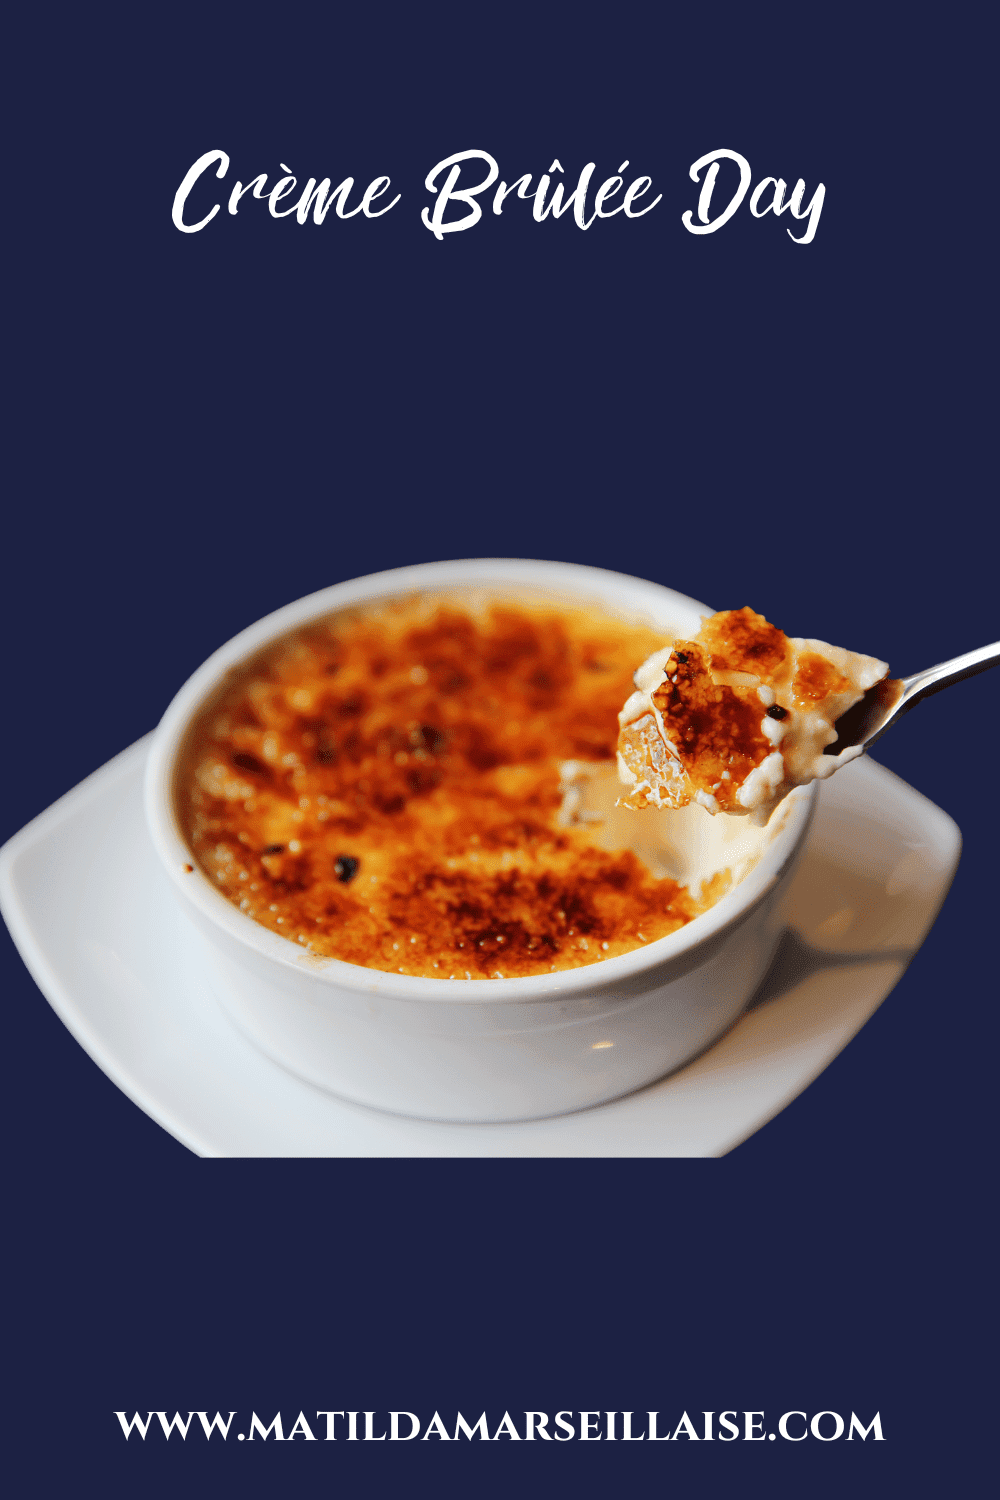 Get your spoons at the ready for Crème Brûlée Day!